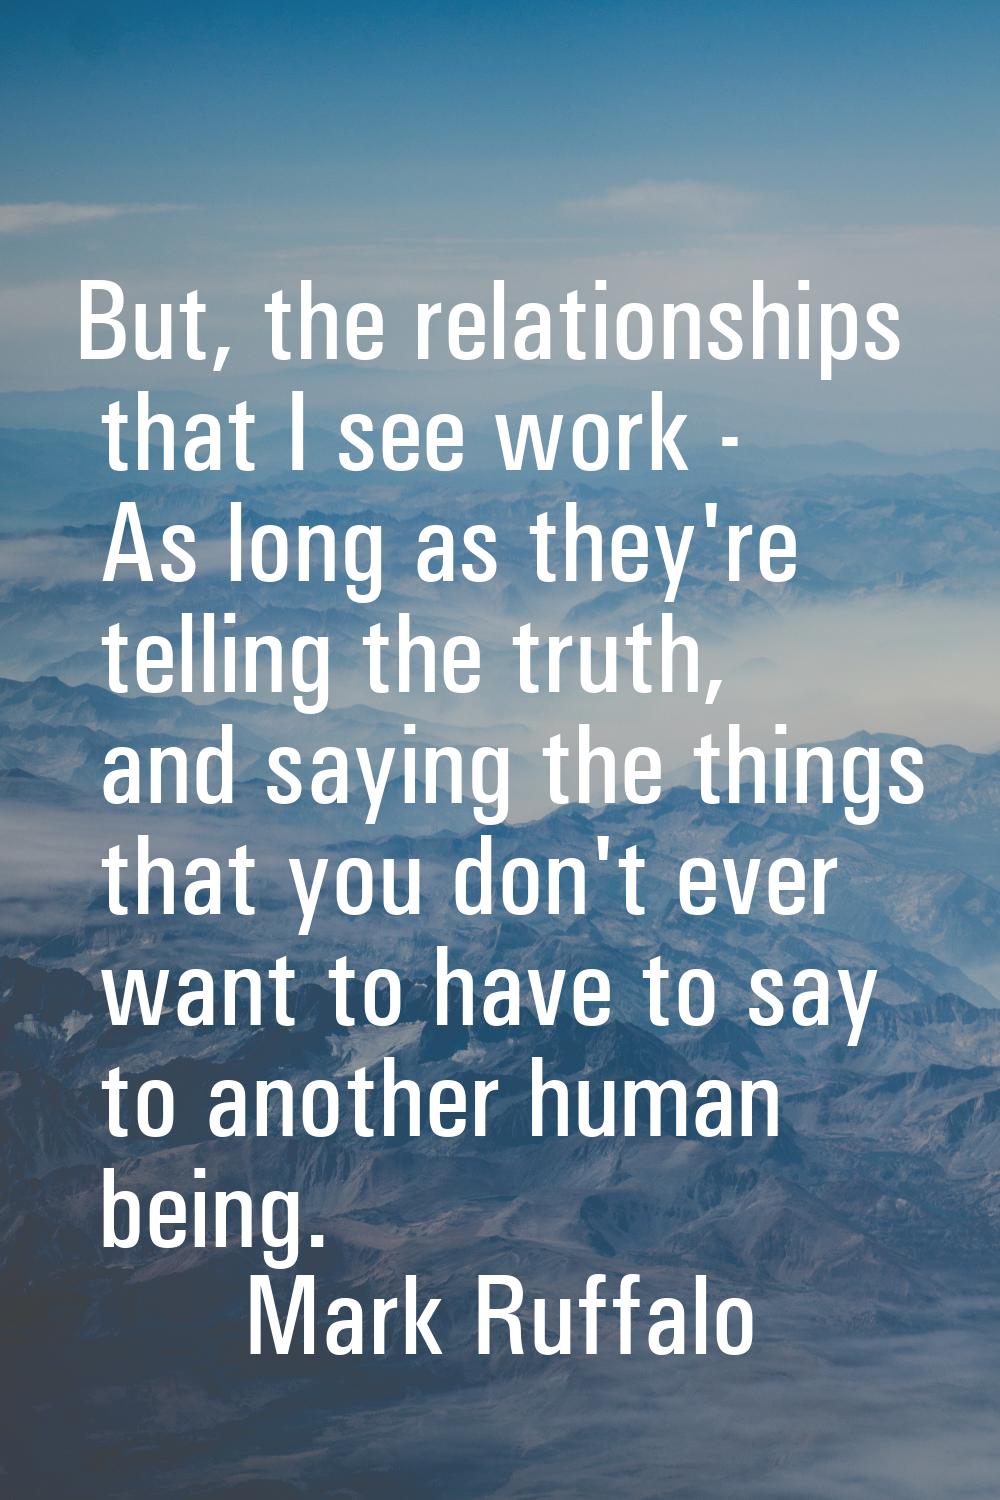 But, the relationships that I see work - As long as they're telling the truth, and saying the thing